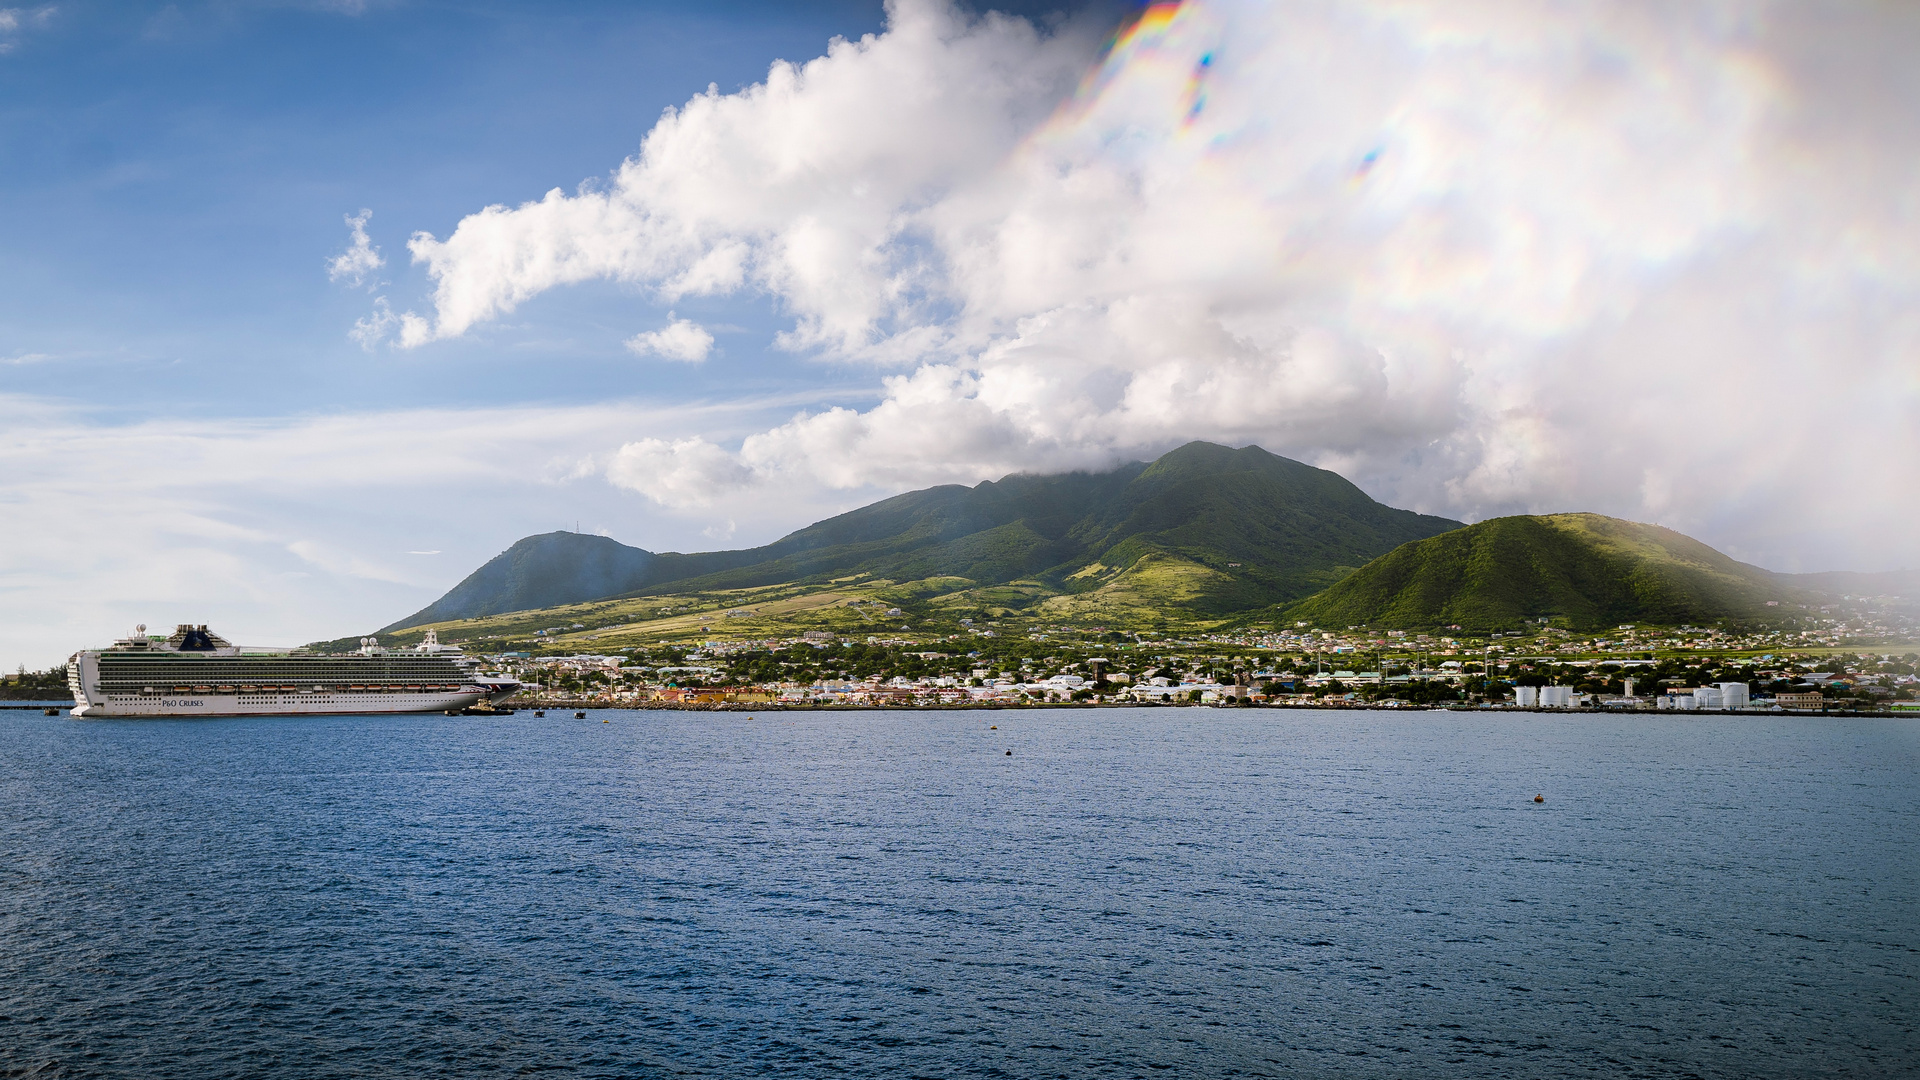 Saint Kitts and Nevis: The islands came under permanent British control in 1782. 1920x1080 Full HD Wallpaper.